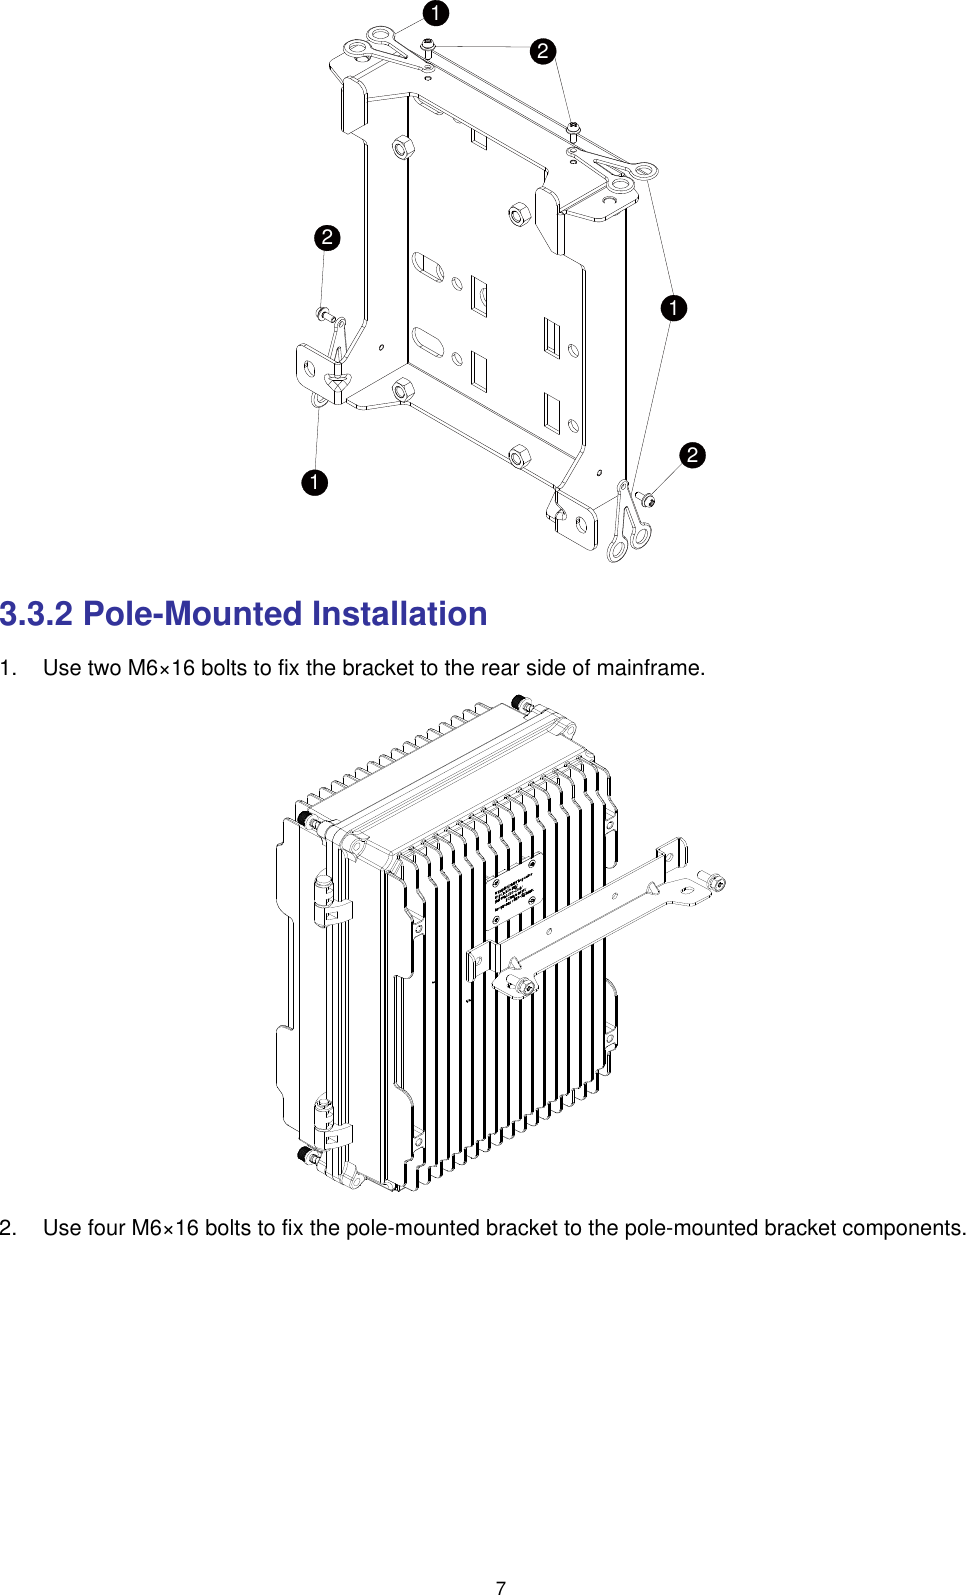  7 122211 3.3.2 Pole-Mounted Installation 1.    Use two M6×16 bolts to fix the bracket to the rear side of mainframe.  2.    Use four M6×16 bolts to fix the pole-mounted bracket to the pole-mounted bracket components. 